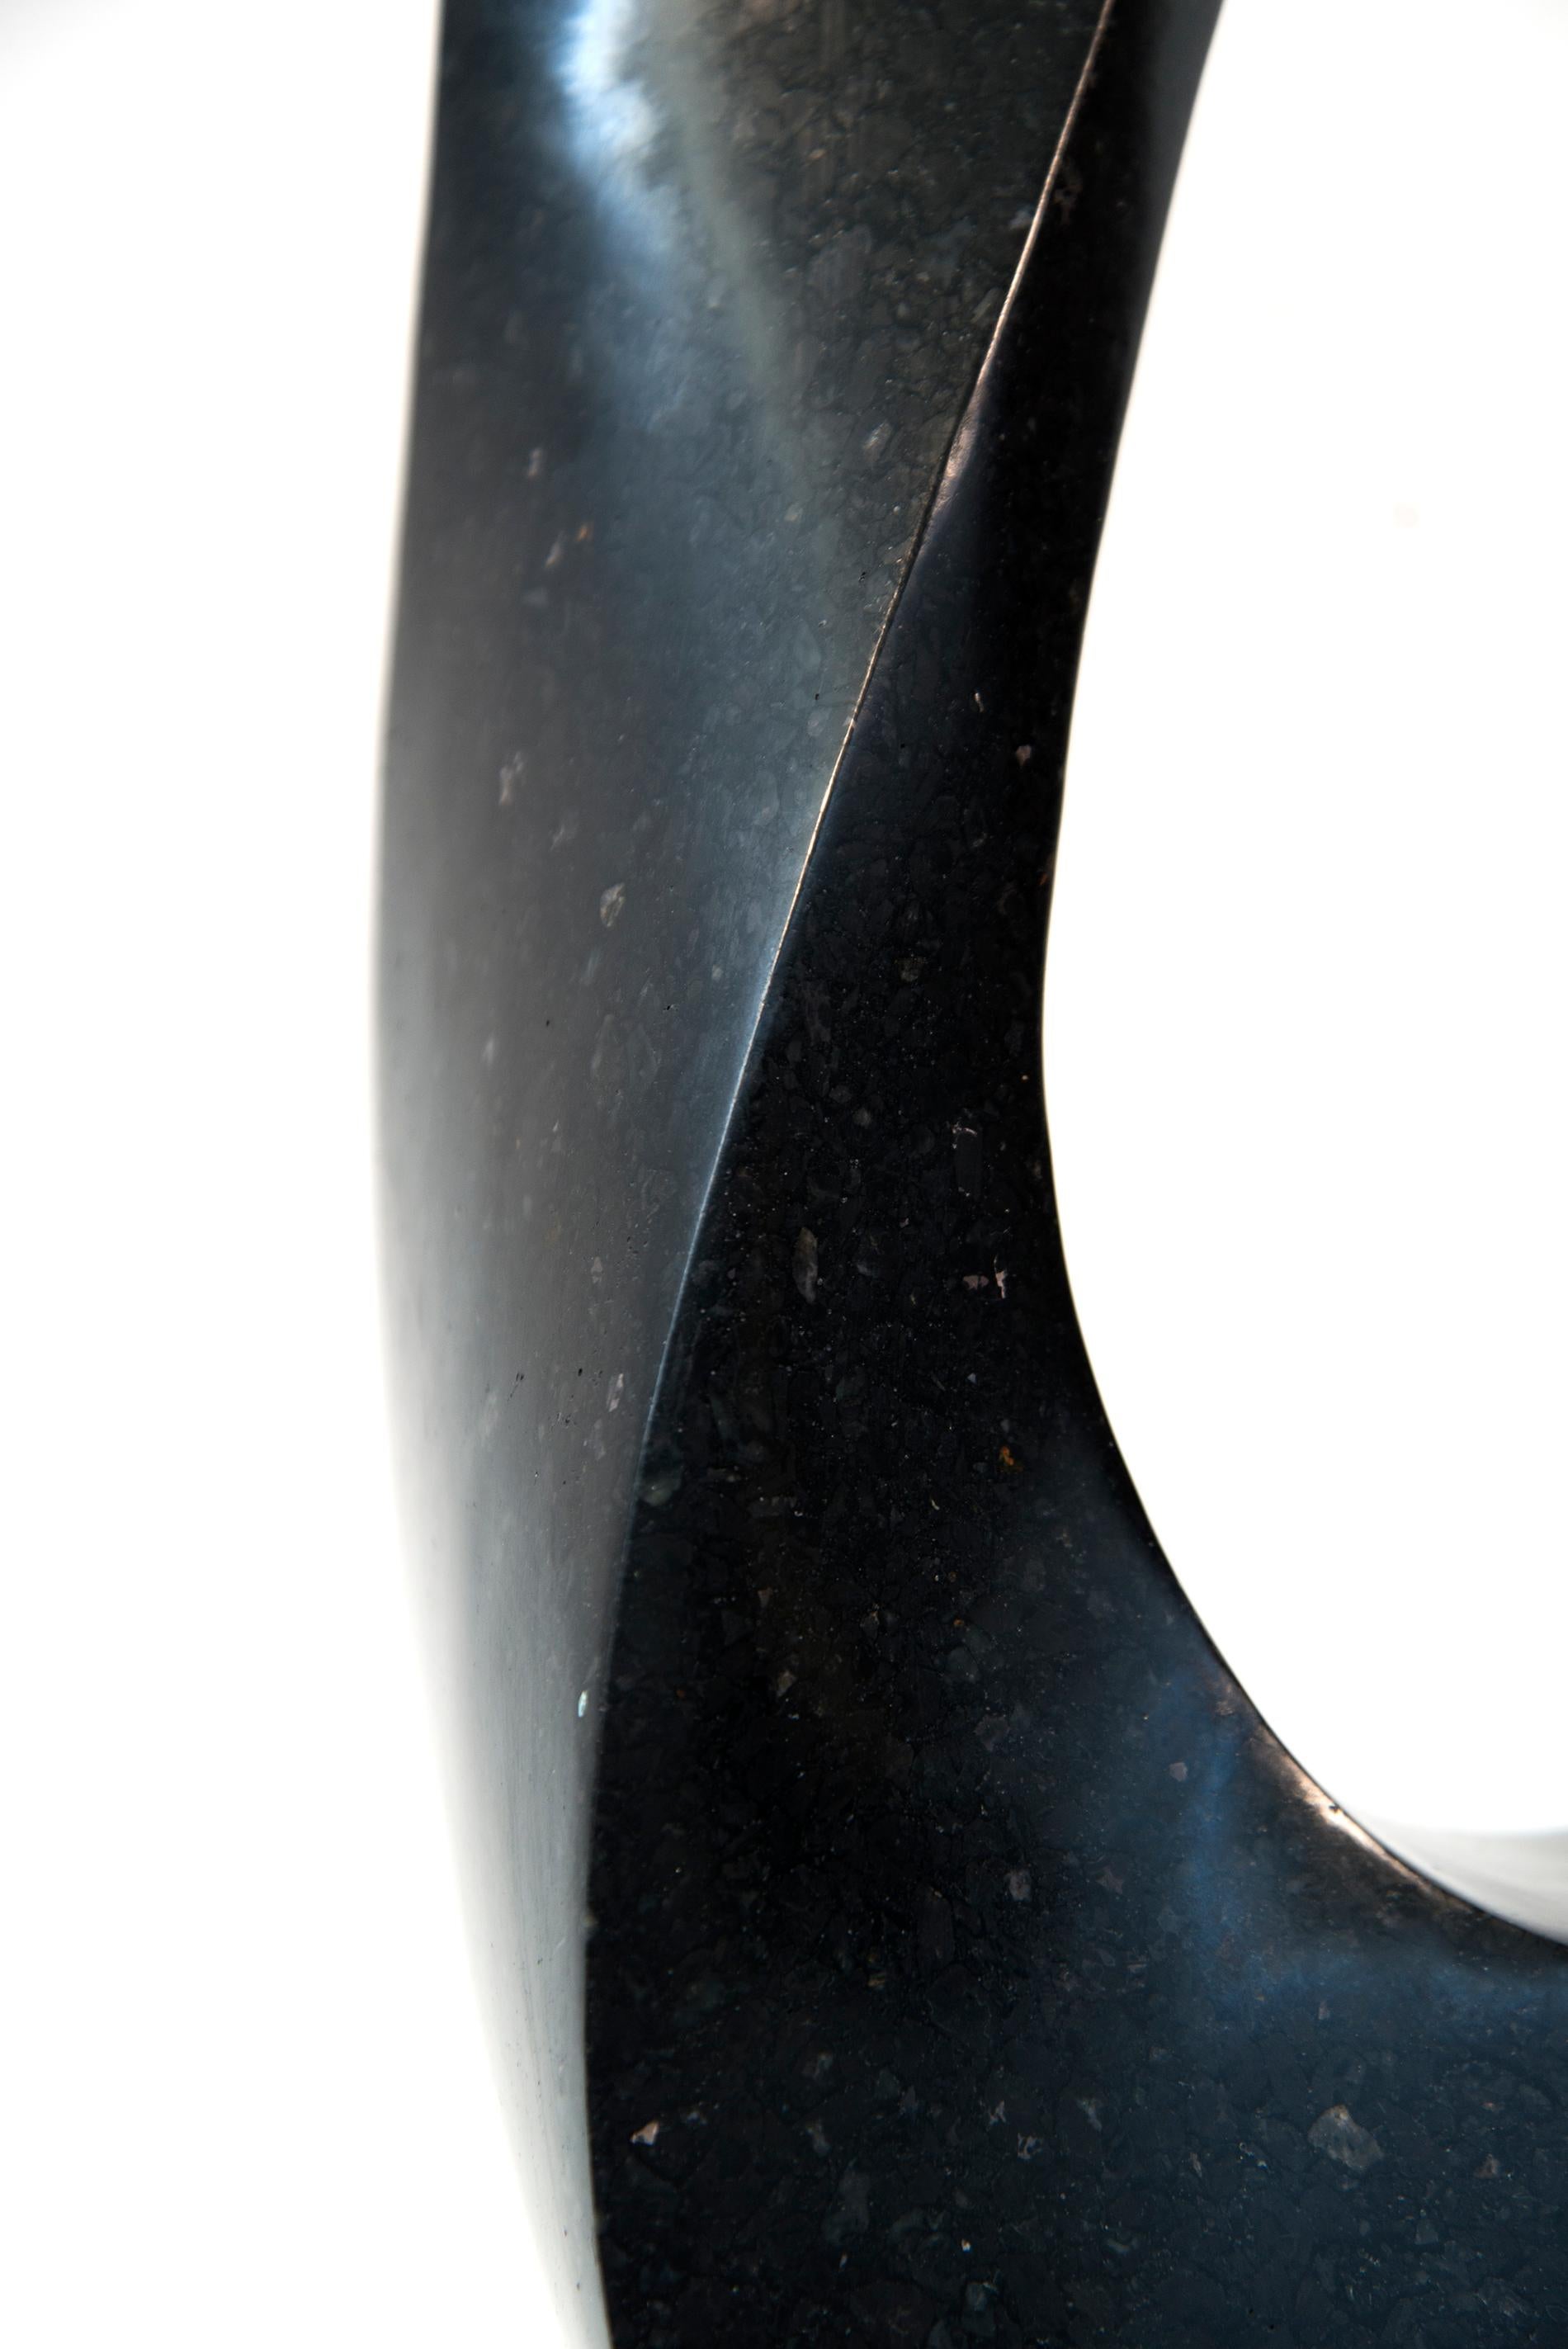 Mobius Minor 1/50 - dark, smooth, polished, abstract, black granite sculpture For Sale 2